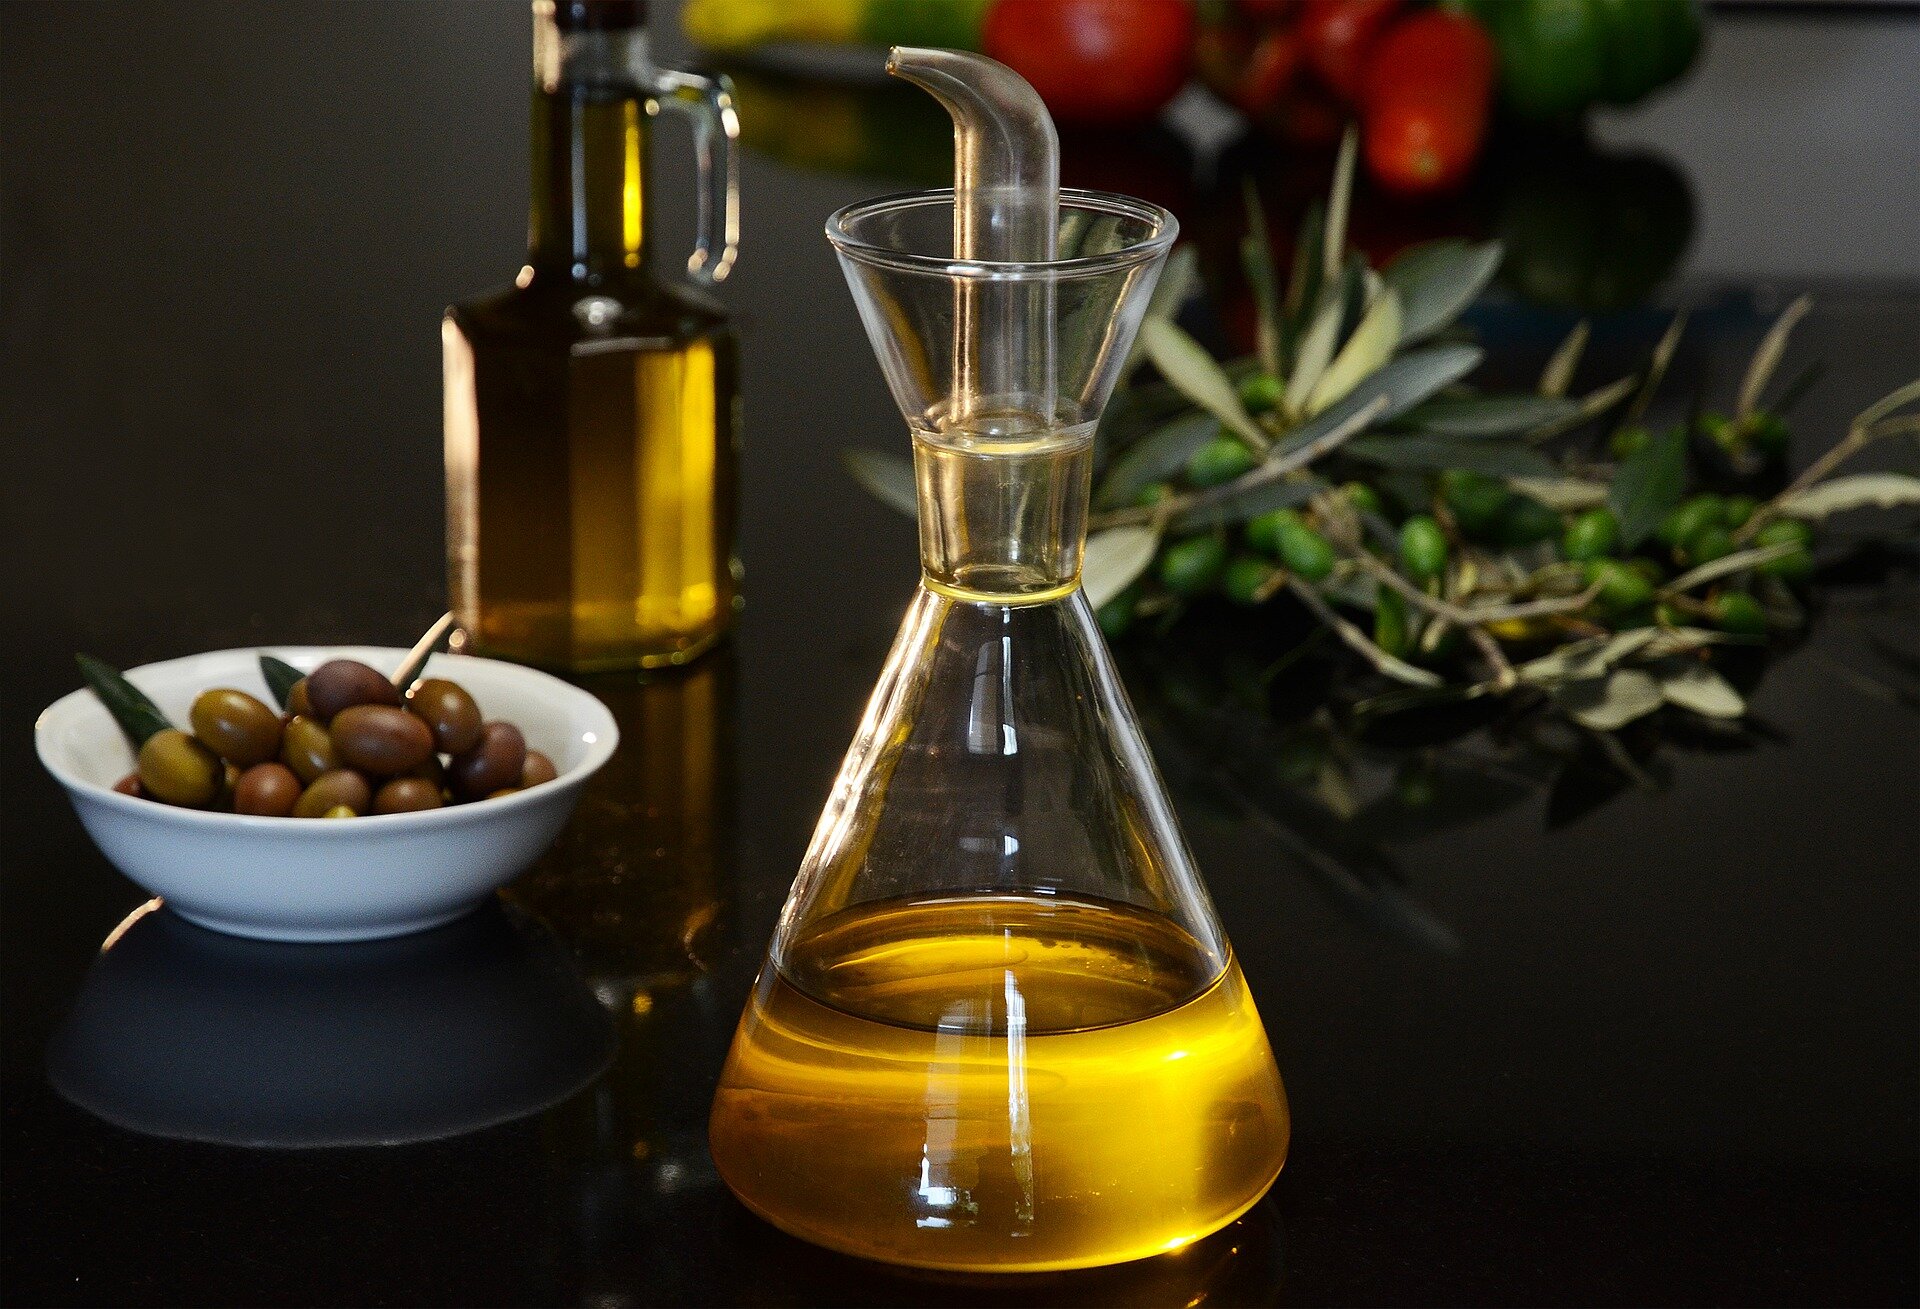 Research shows that daily consumption of olive oil reduces the risk of developing dementia